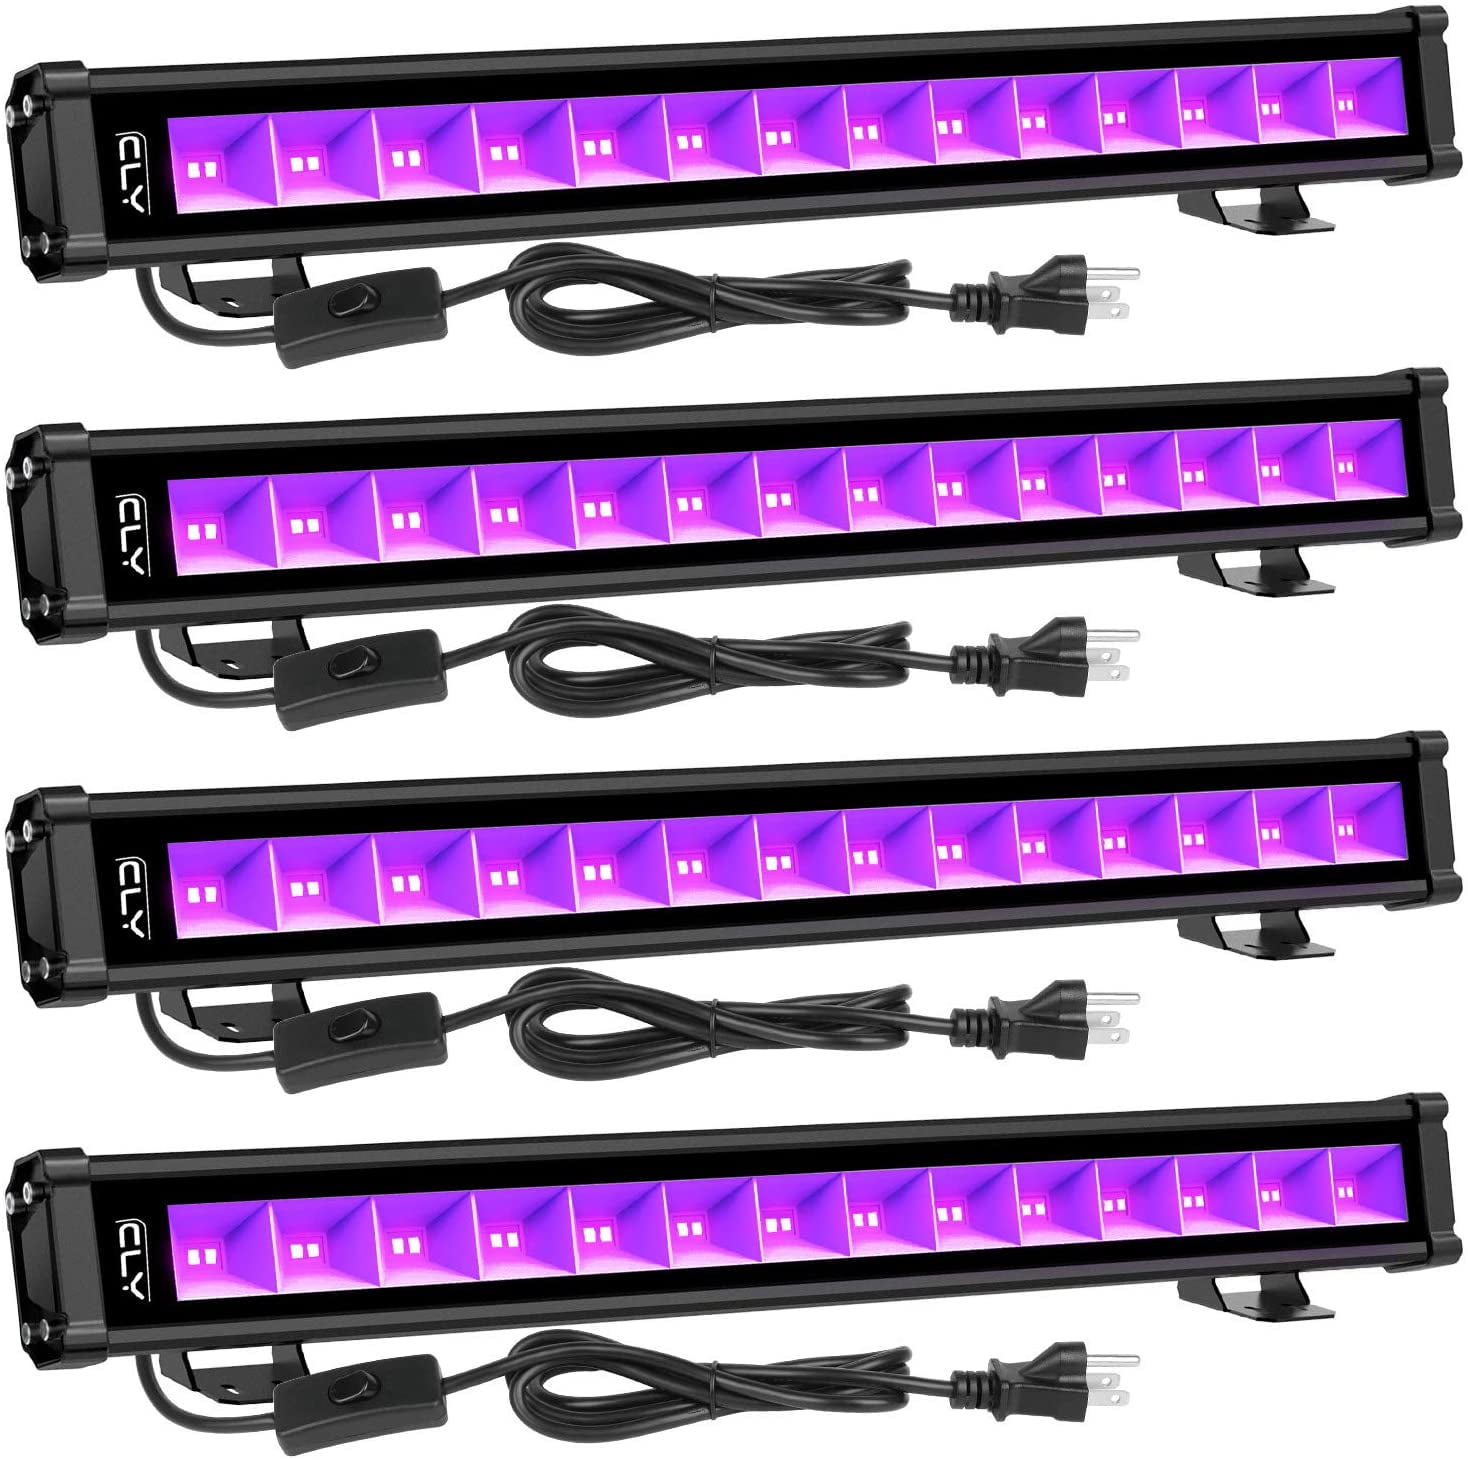 Birthday Wedding Party Glow in The Dark Party Supplies for Stage Lighting Body Paint CLY 4 Pack 28W UV LED Blacklight Bar Fluorescent Poster 5ft Power Cord with US Plug and Switch 